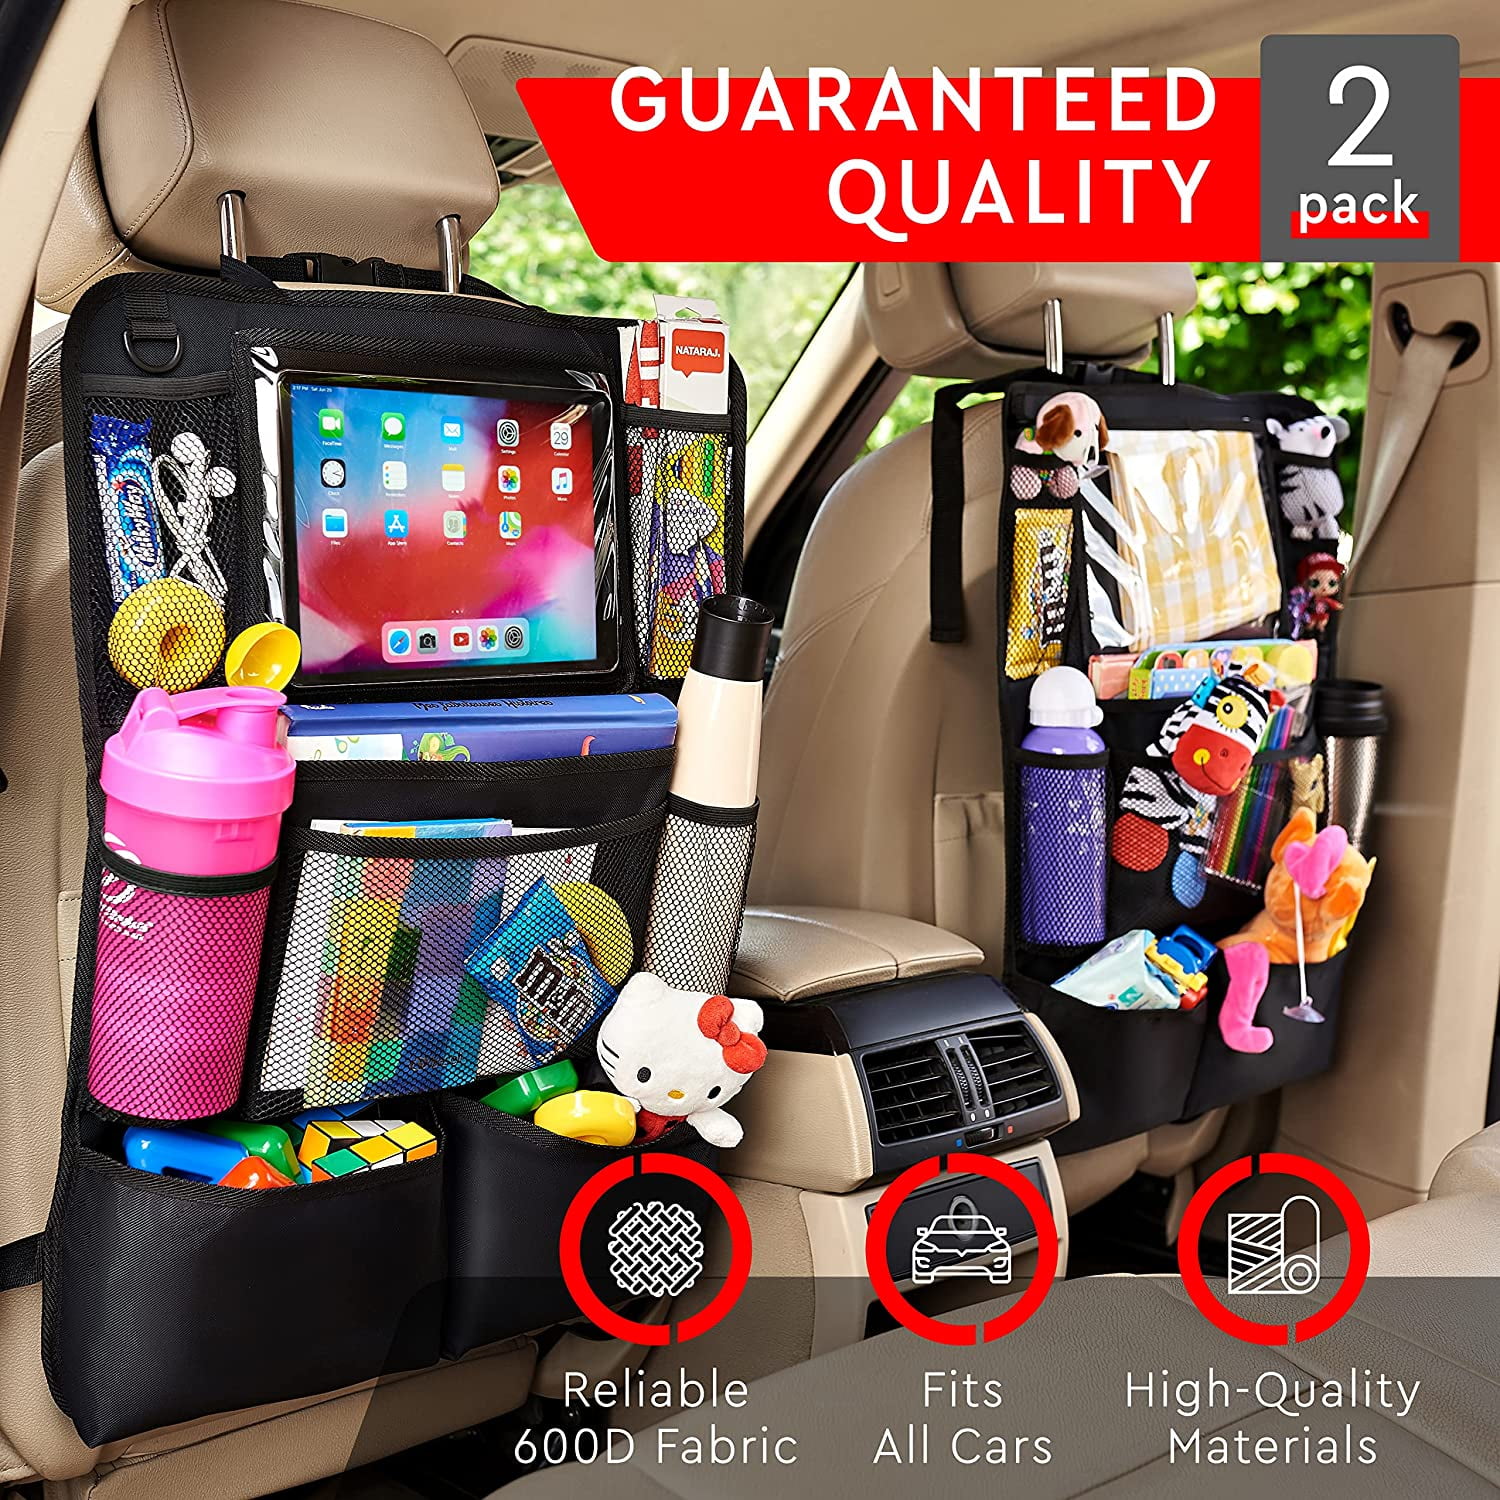 2 Pack YMD Backseat Car Organizer with 11 inches Touch Screen Tablet Holder 4 USB Charging Port Car Seat Back Kick Mats Protector Travel Accessories for Kids 